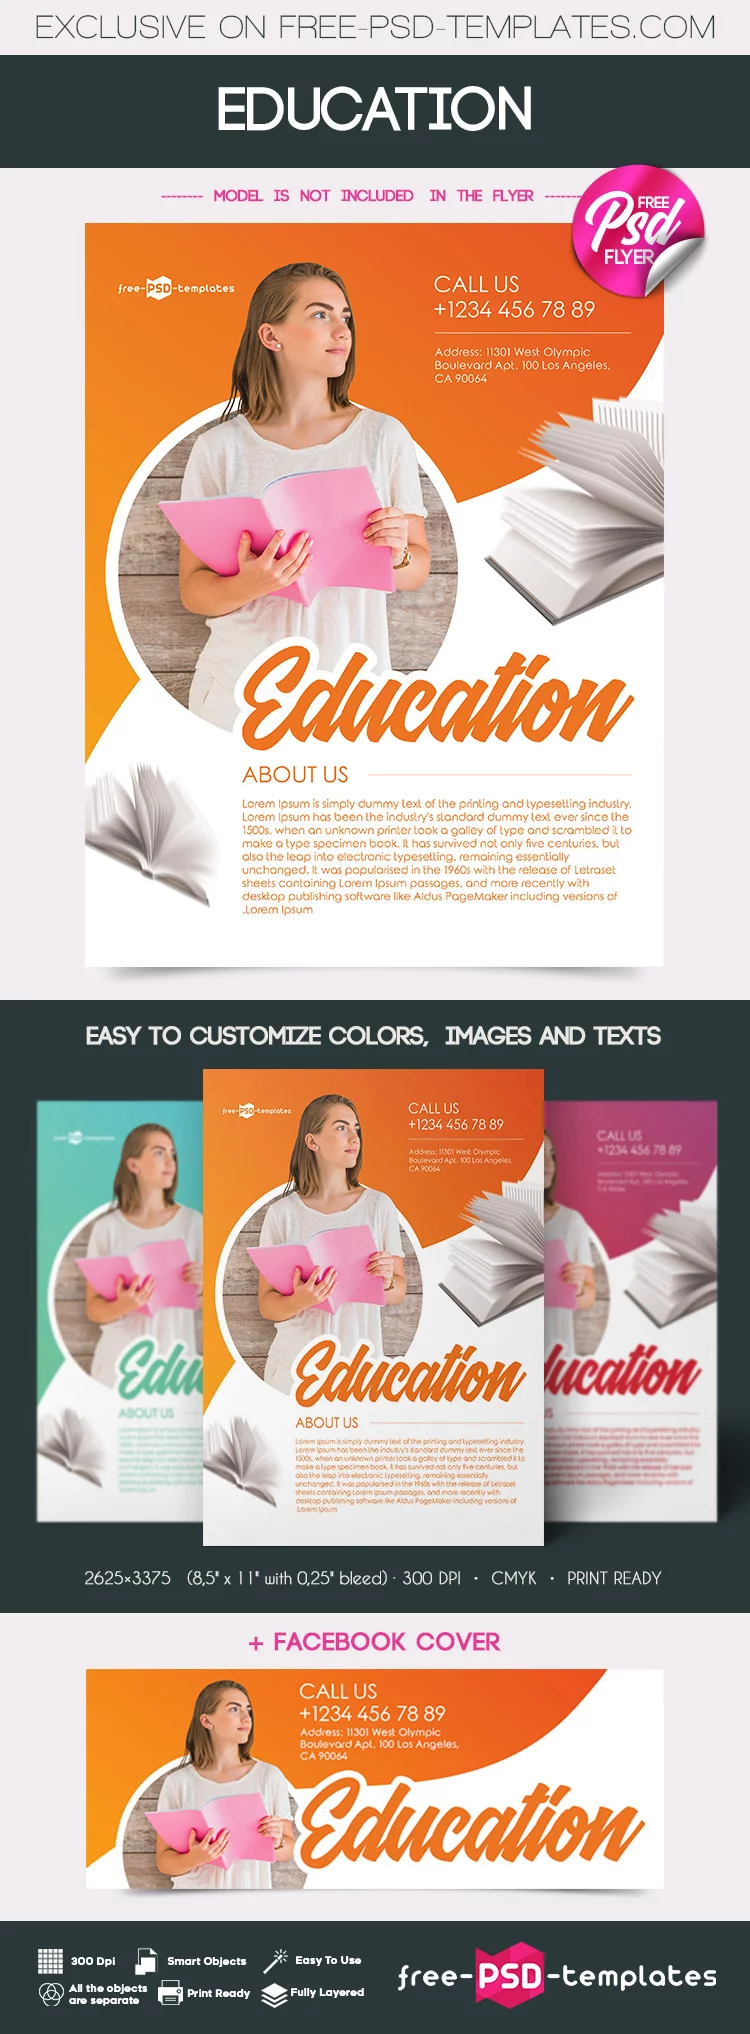 Free Education Flyer in PSD